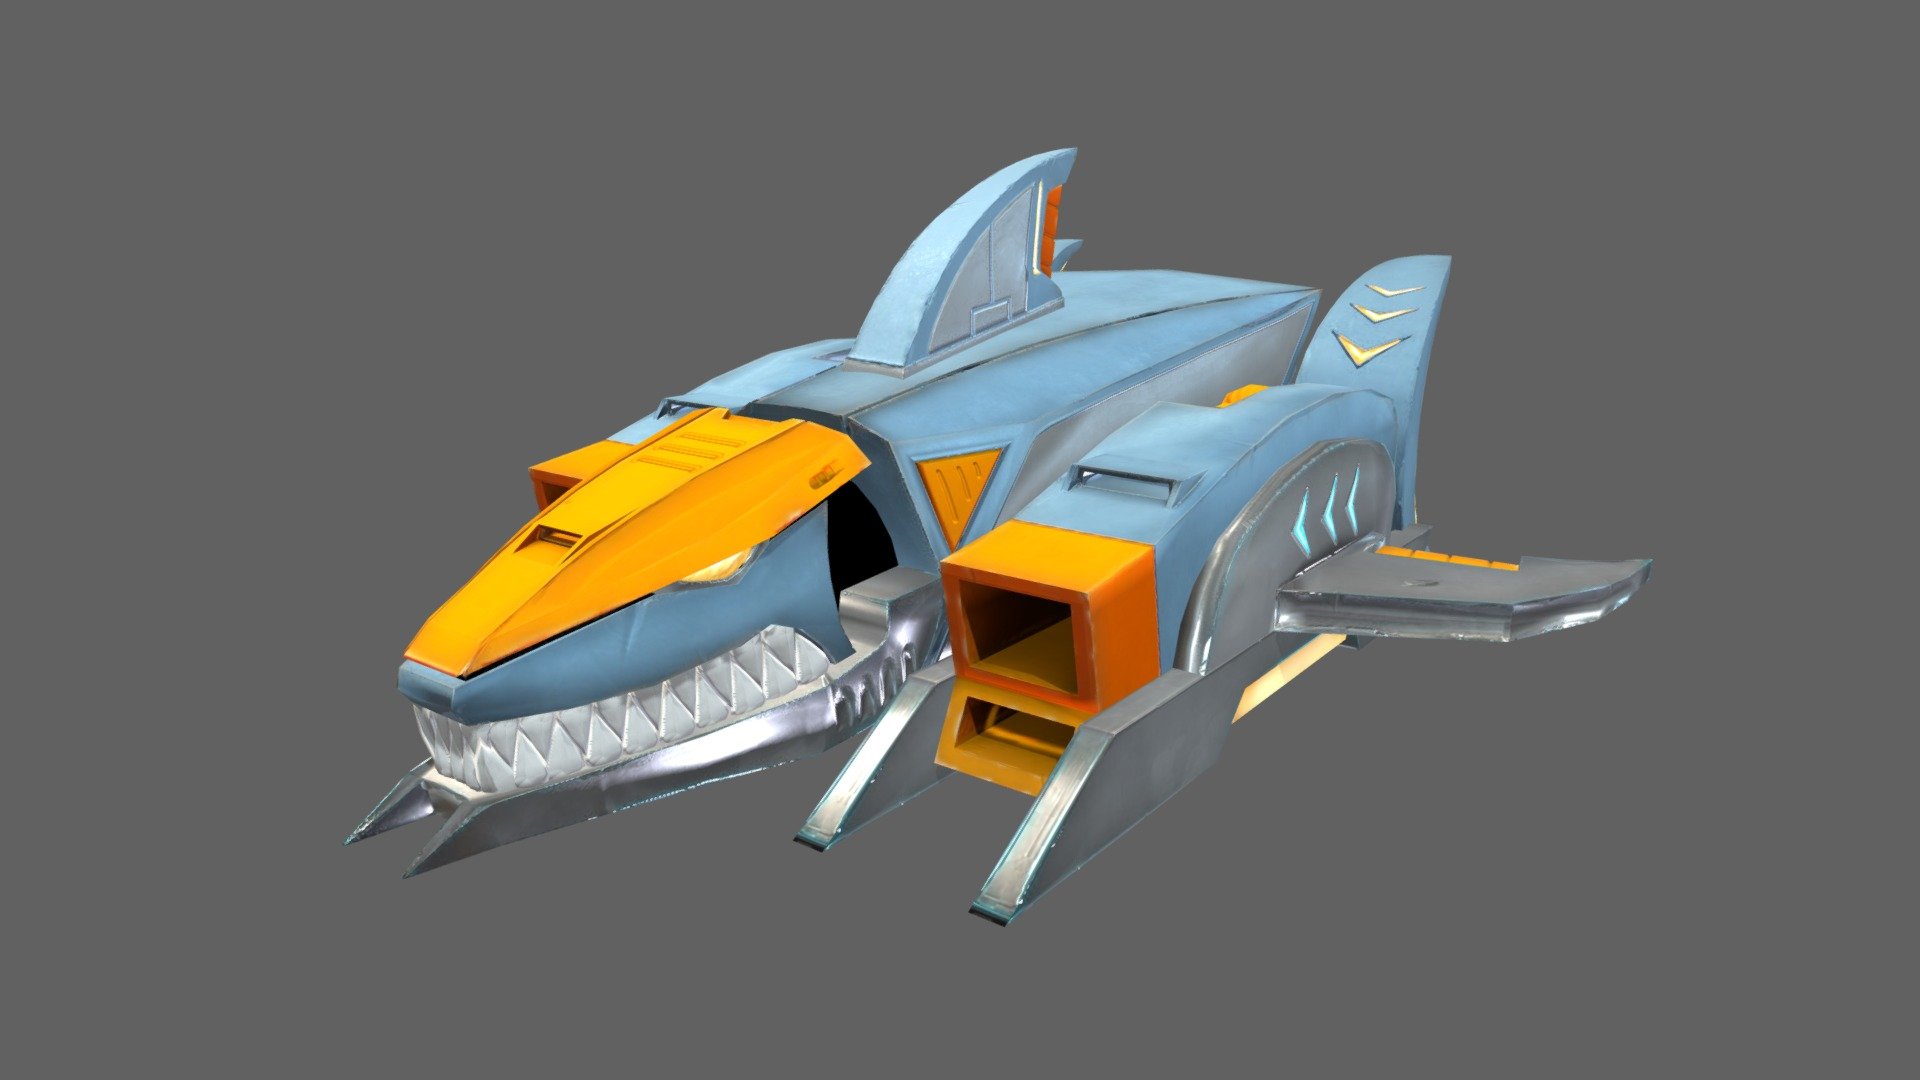 Vehicle asset for racer game.
Model, texturing, rigging and animation by myself.
Concept art by https://sketchfab.com/Emiljul - Shark space racer - 3D model by TheJungleVIP 3d model